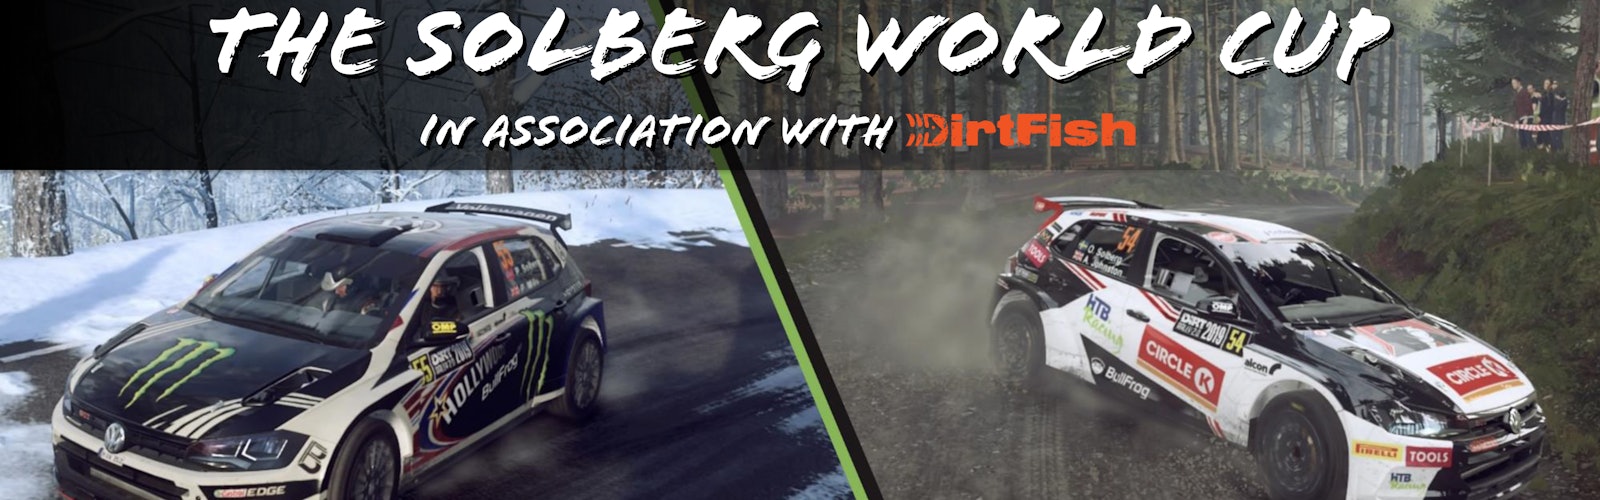 Solberg World Cup